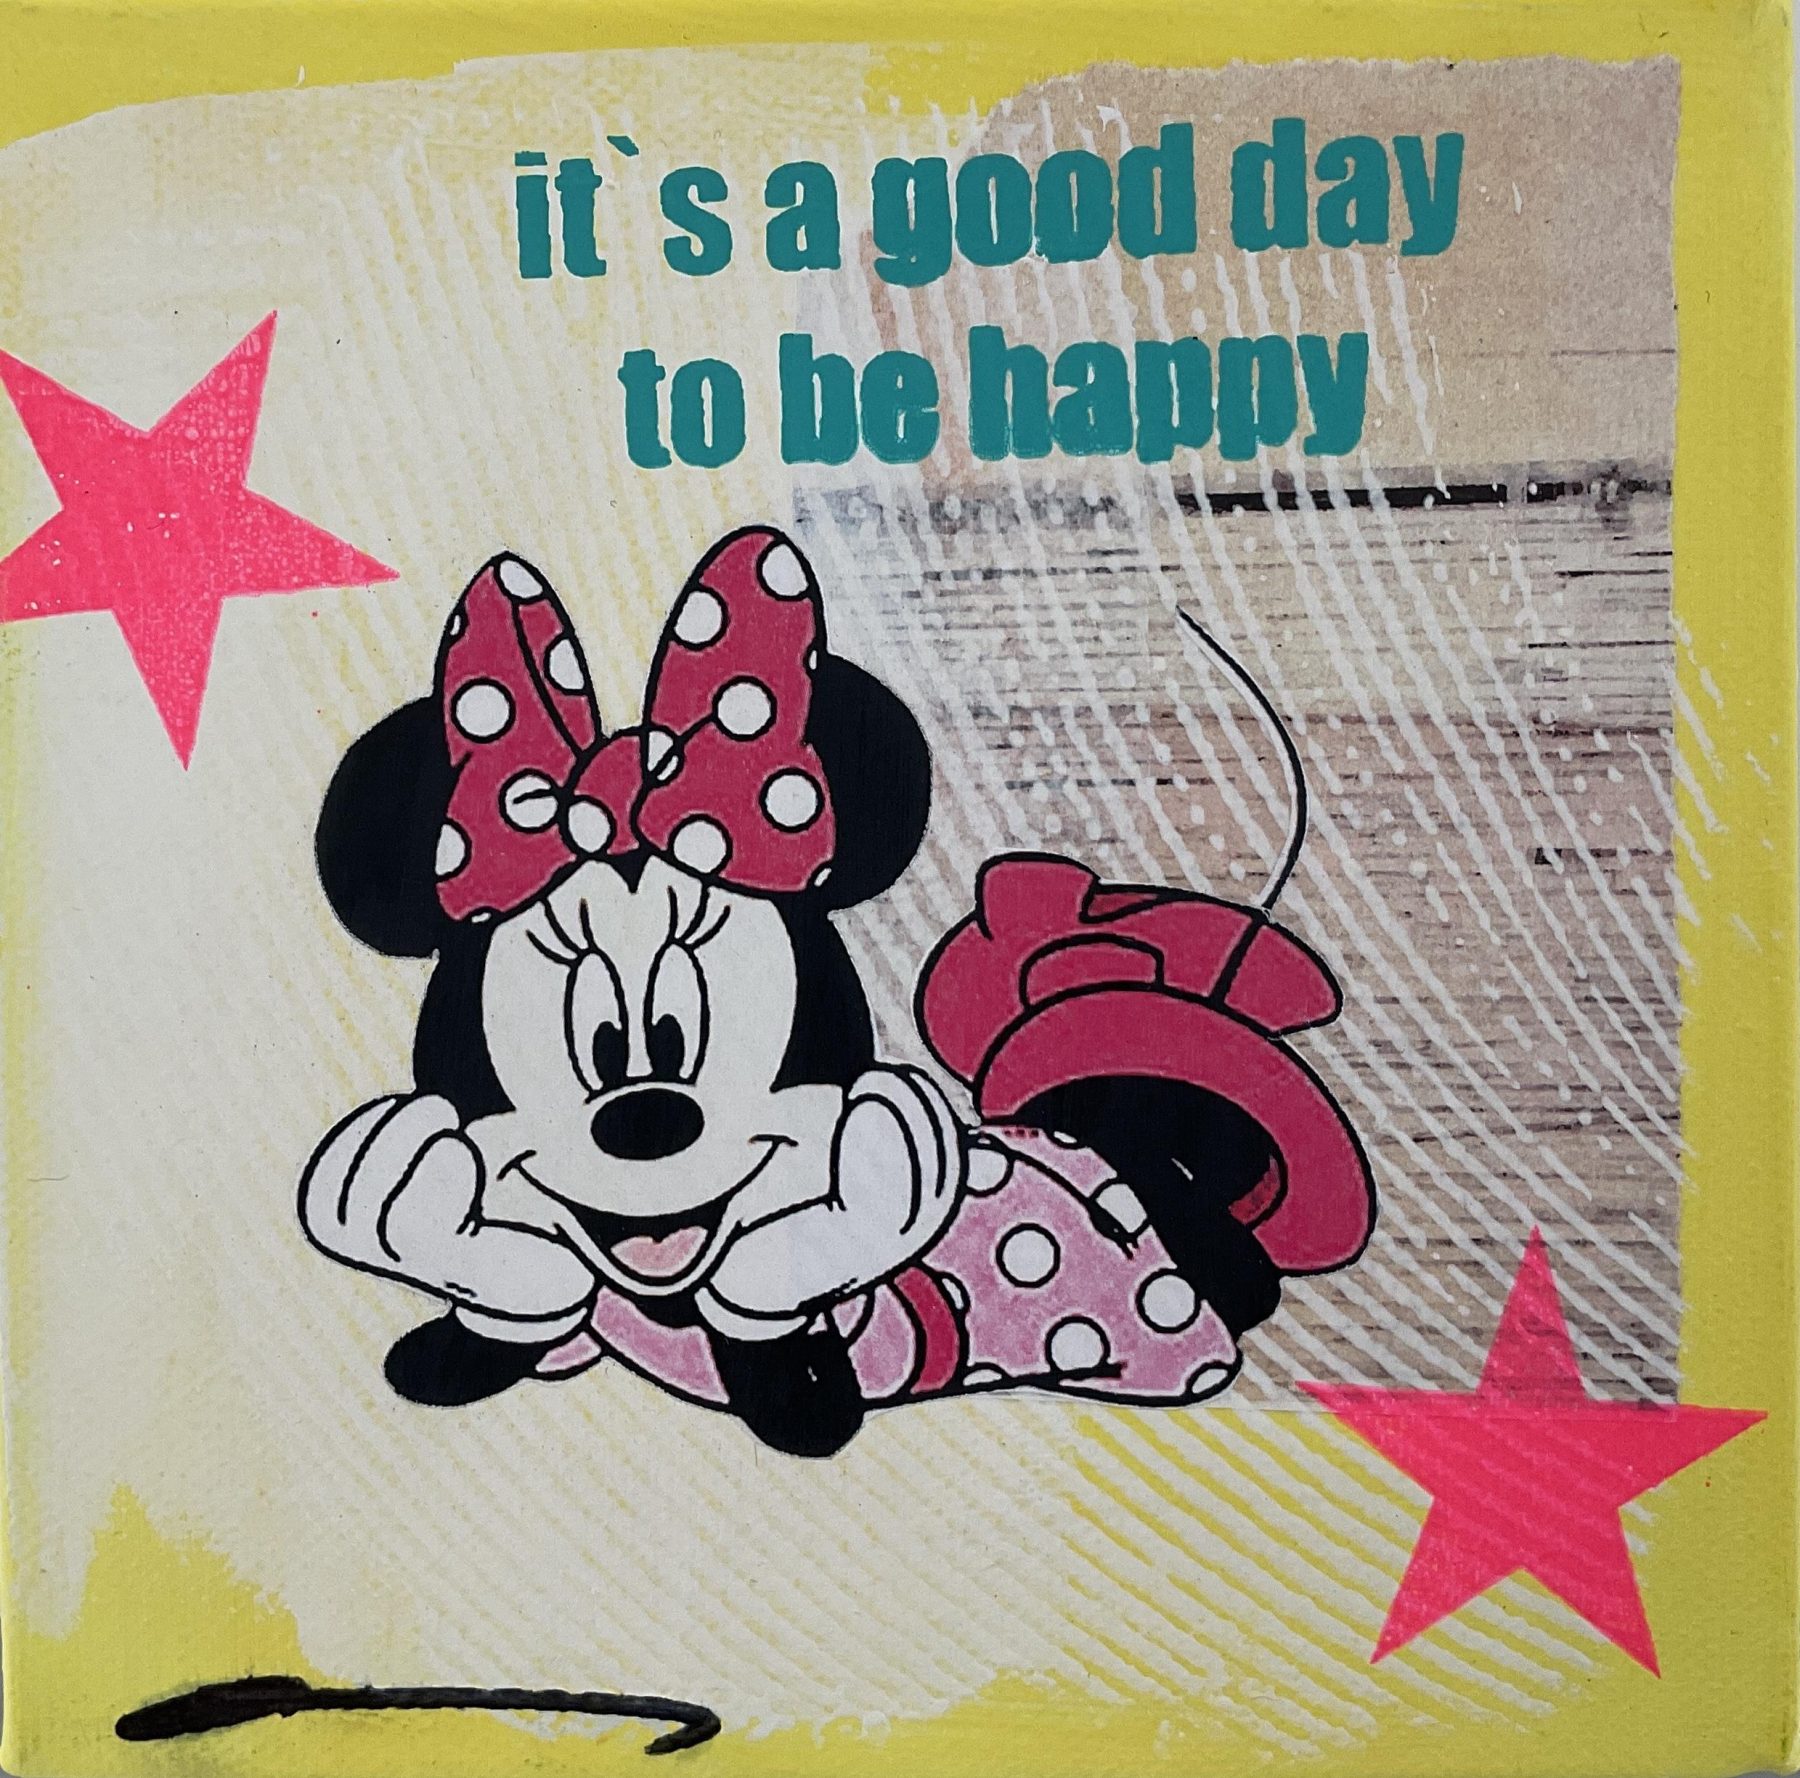 Minnie Mouse "It's a good day...", - Flores, Anna - k-2309AF7